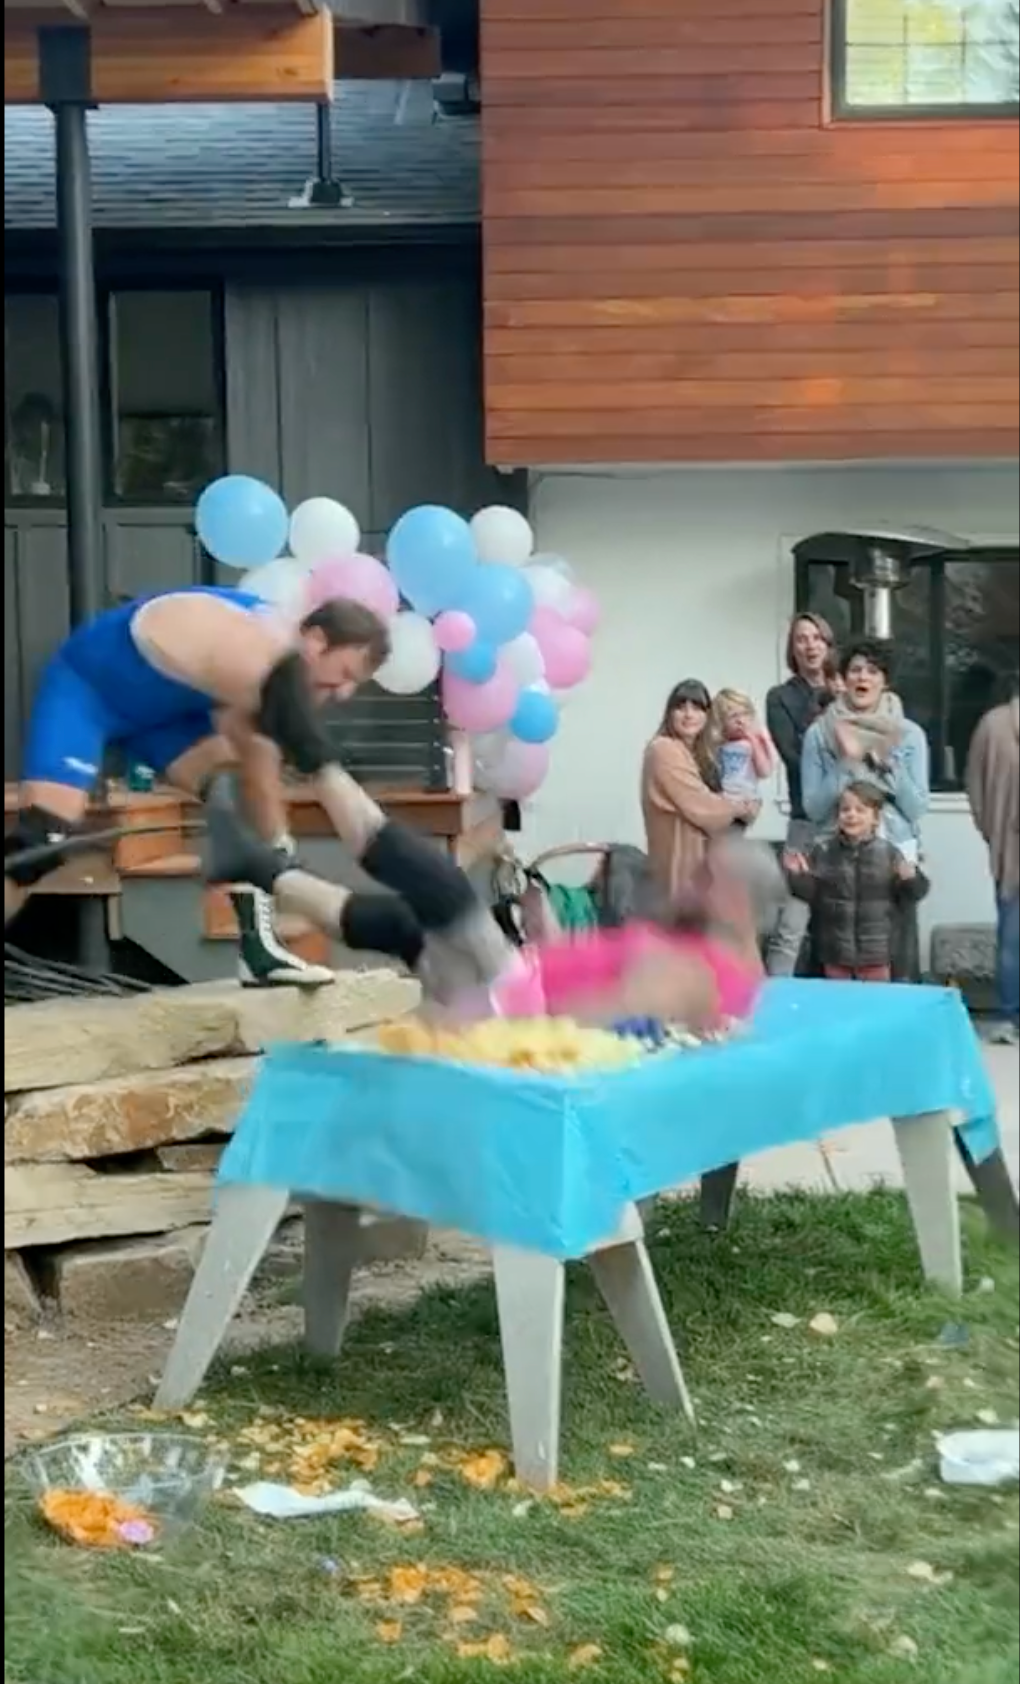 WWE-style gender reveal is so good it's gone viral